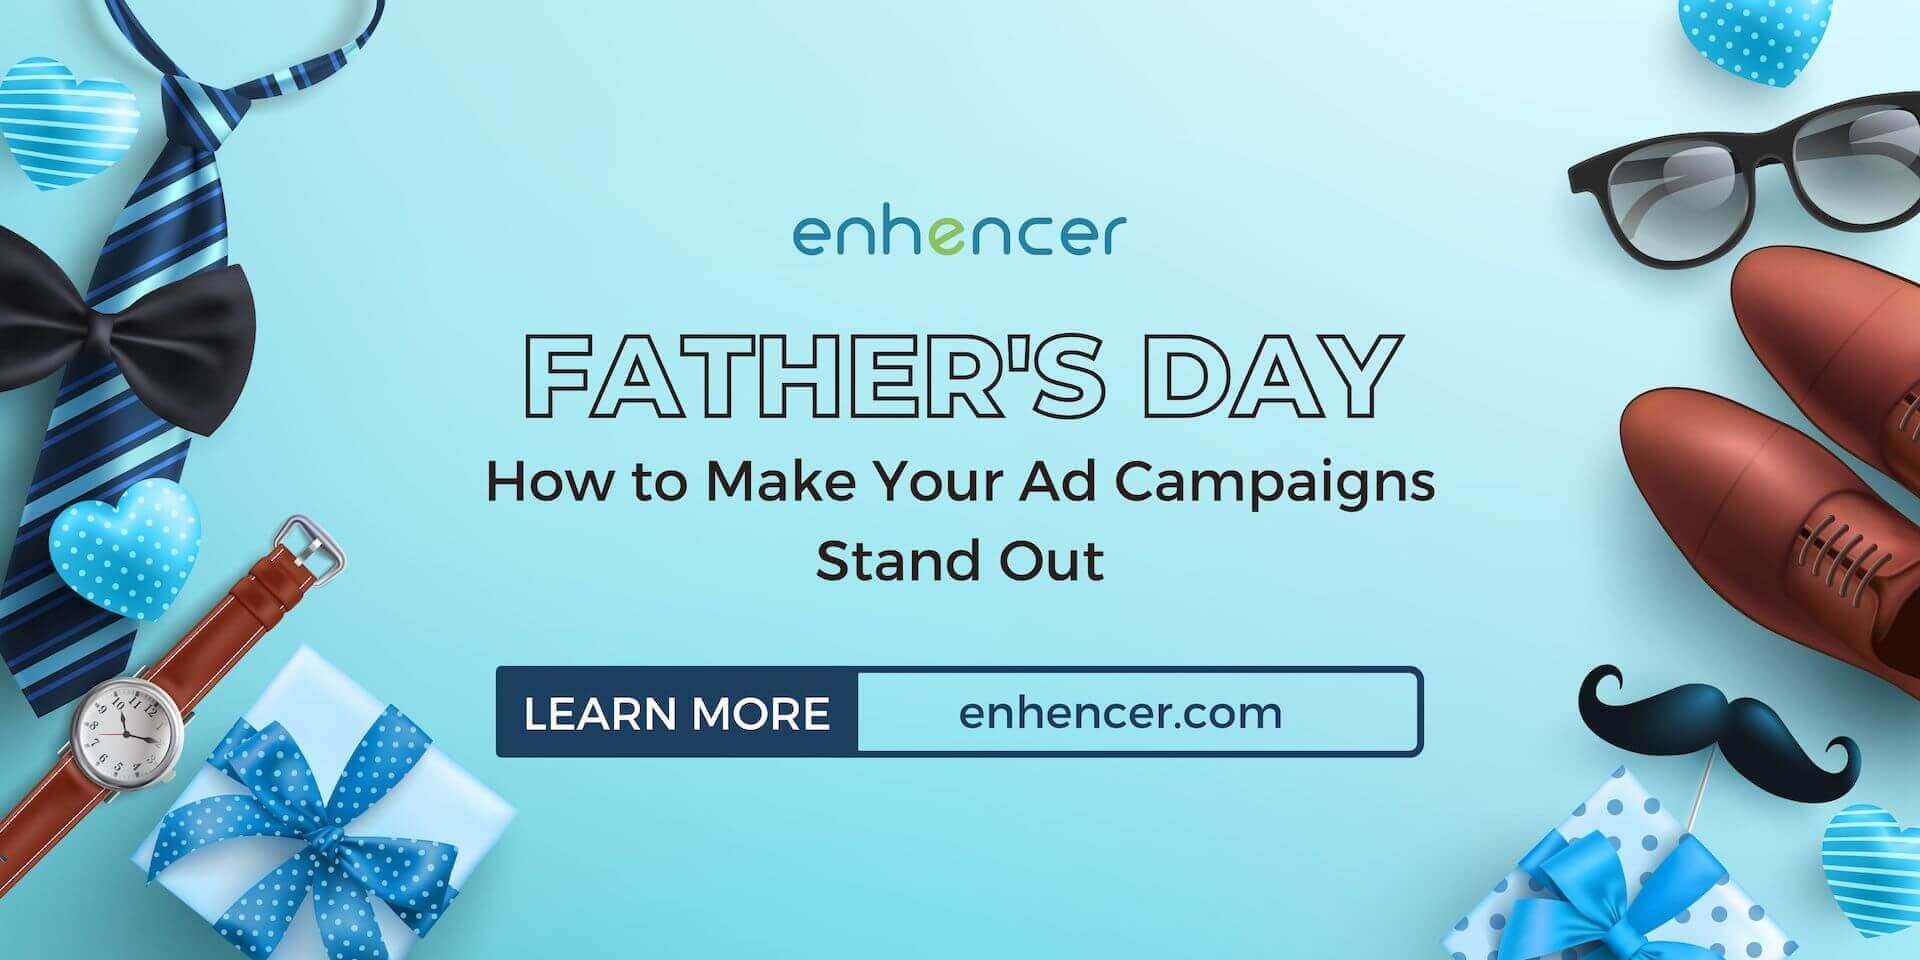 Fathers Deserve The Best: How to Make Your Father's Day Campaign Stand Out